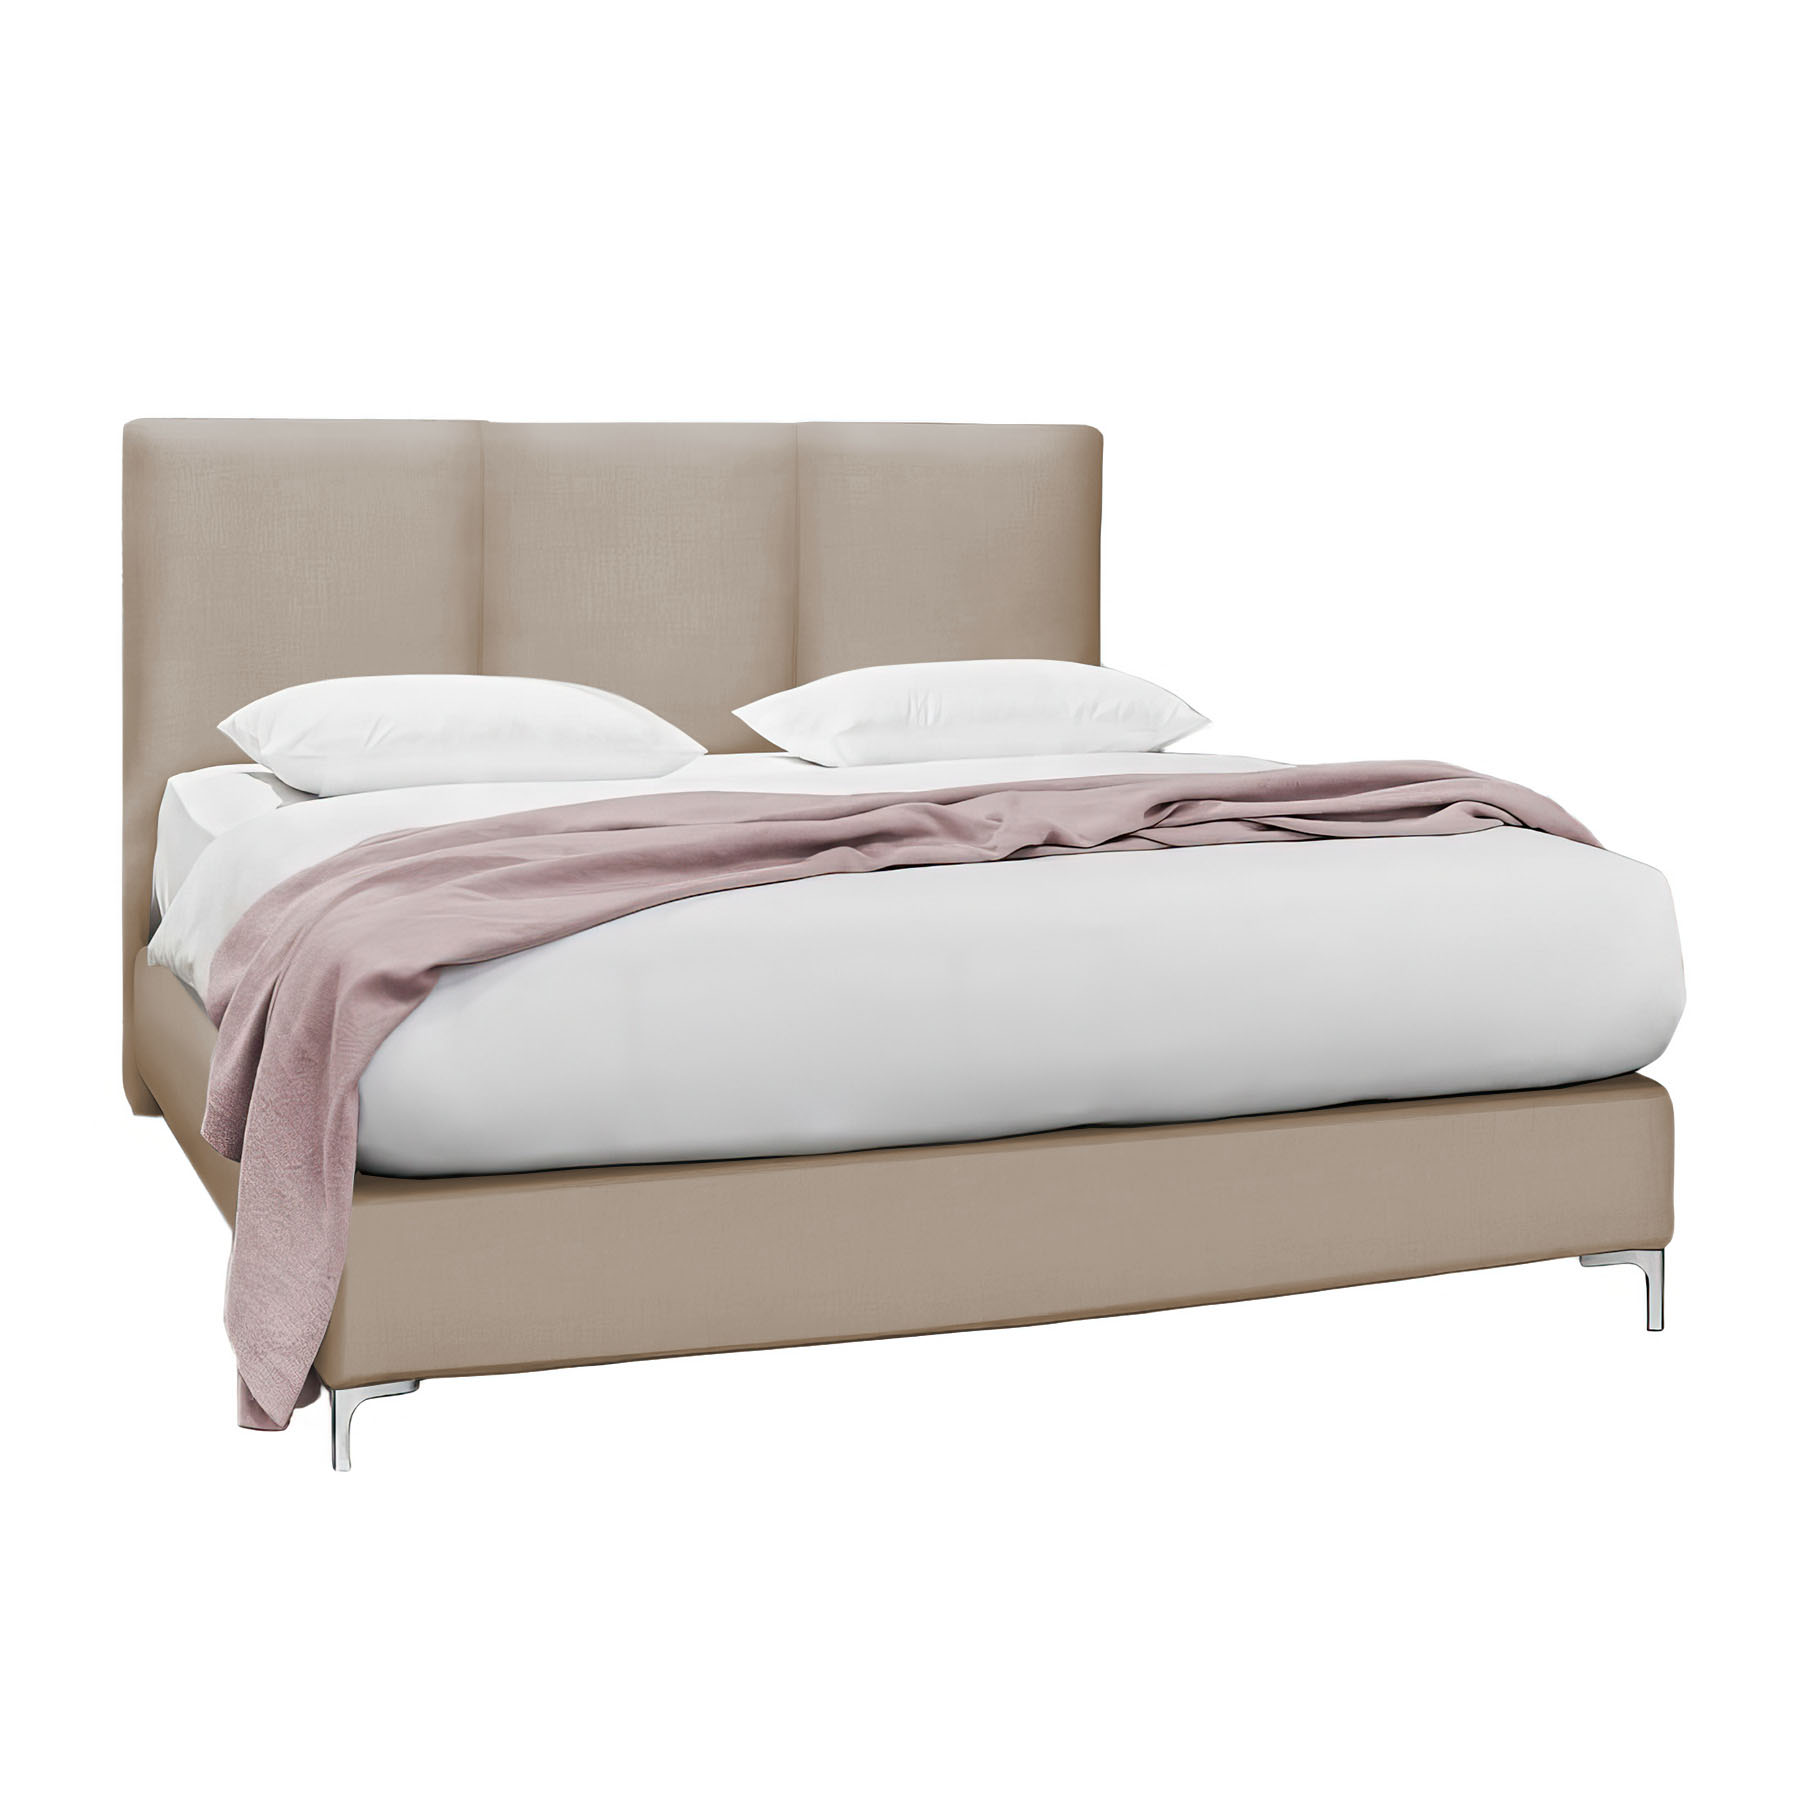 Boxspringbett Kate Select 160/210cm in Hot Madison Taupe